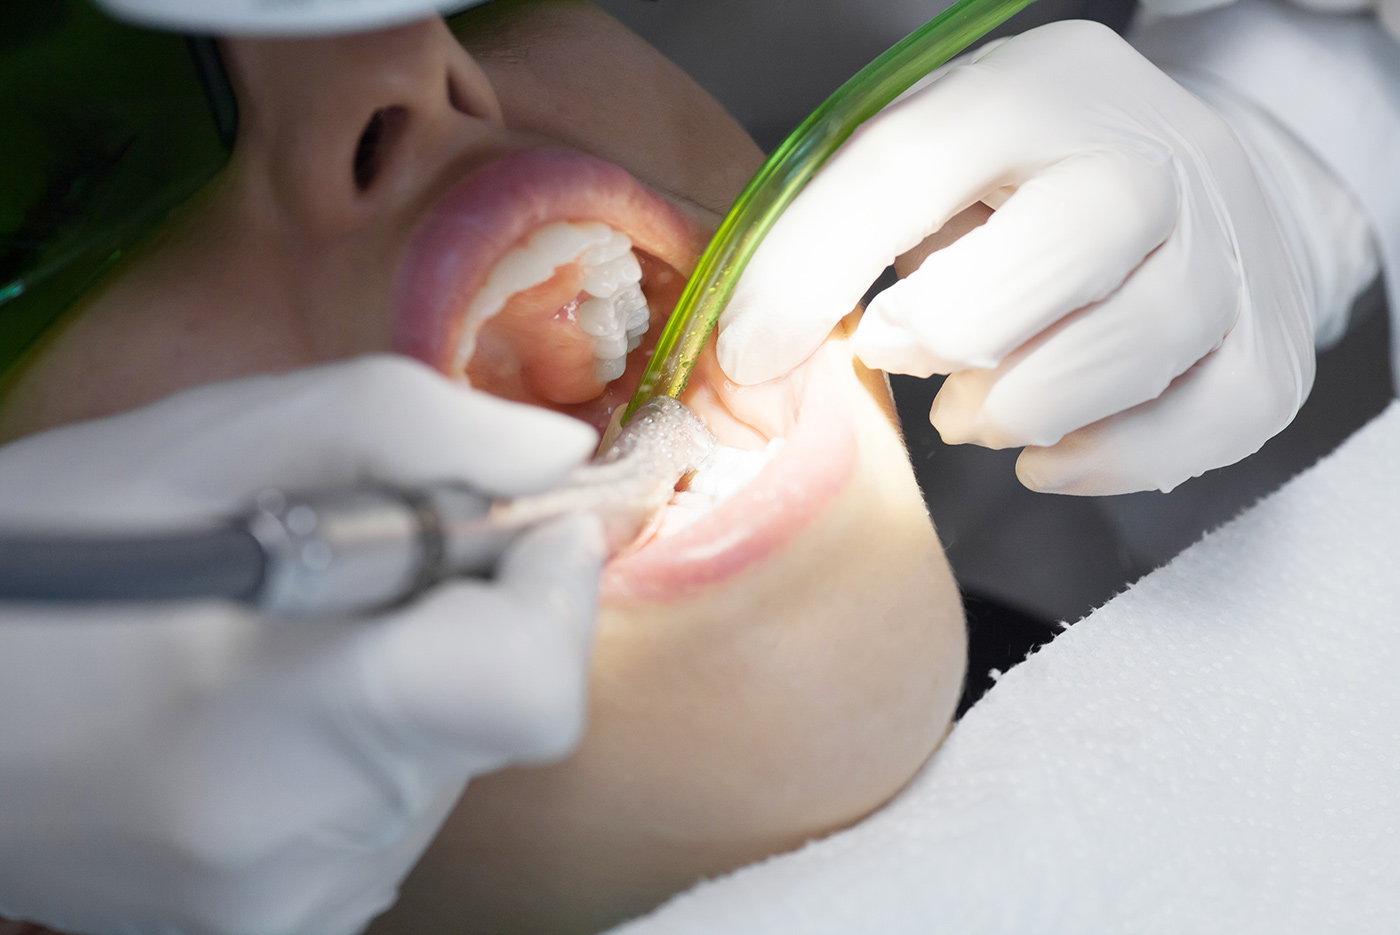 What emergency dental issues can we treat